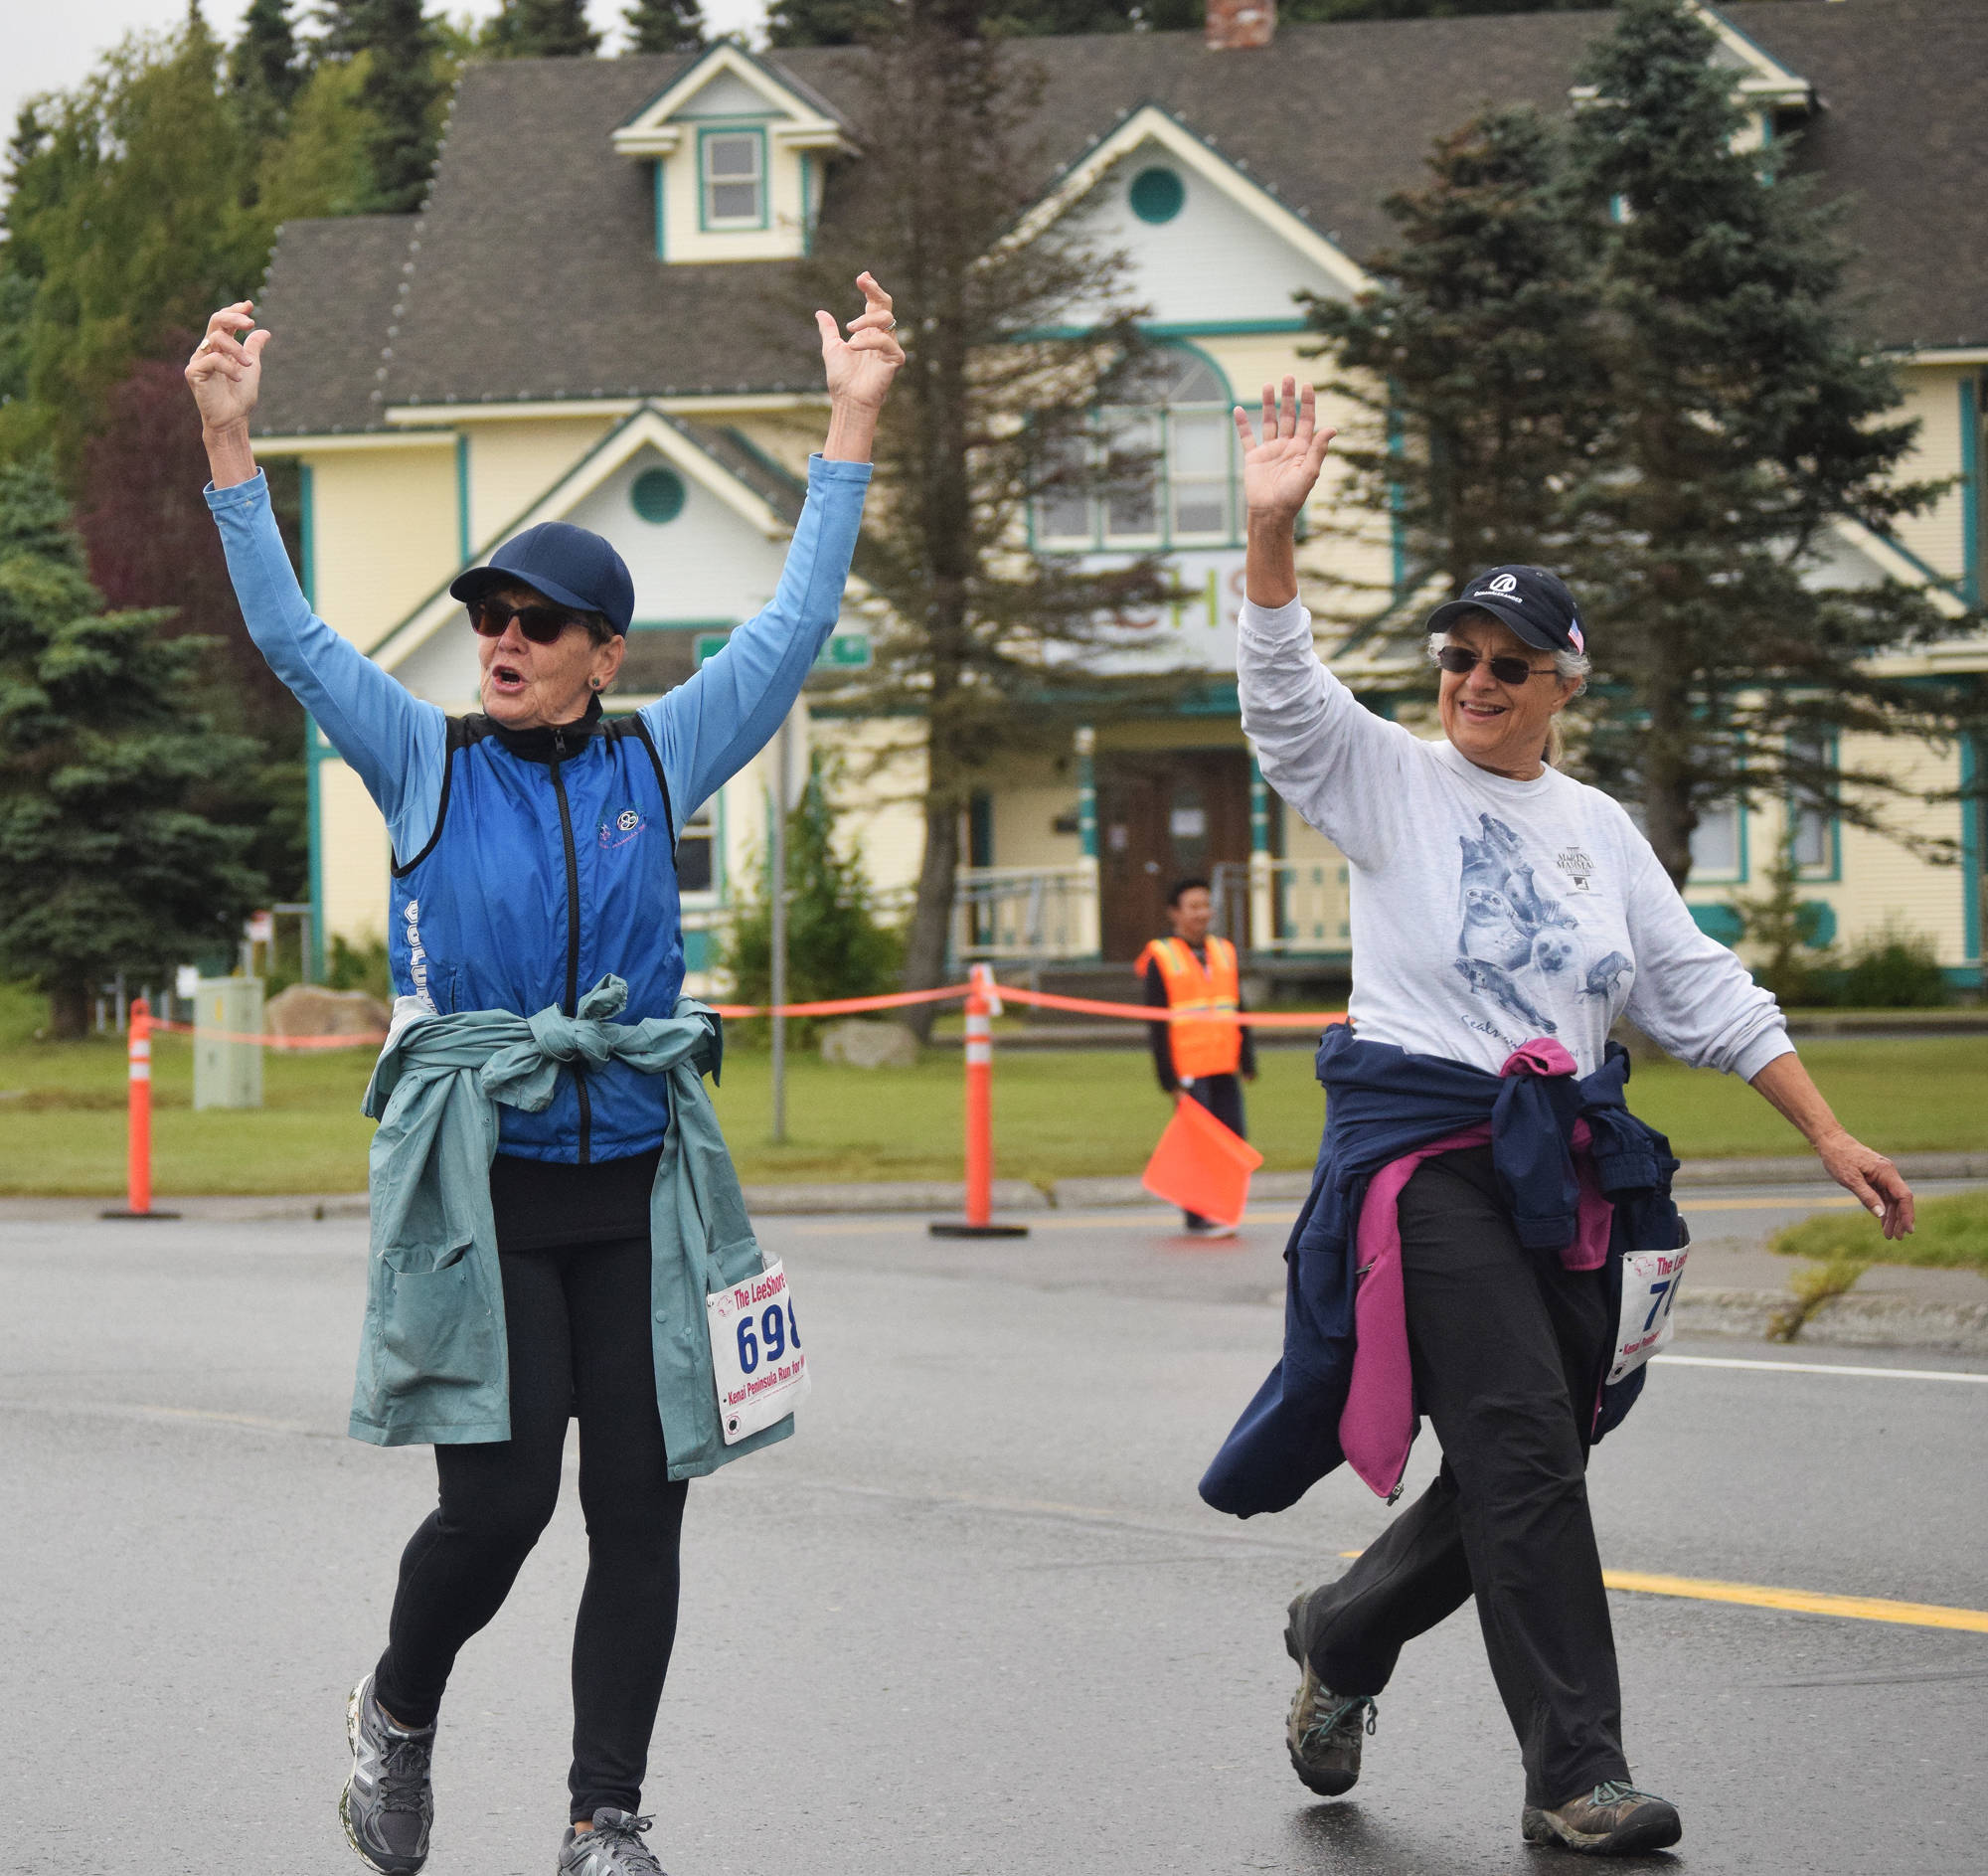 Mary Armstrong (left) and Barb Beeman approach the finish line of the women’s 5K race Saturday morning in the 31st annual LeeShore Center Run for Women in Kenai. (Photo by Joey Klecka/Peninsula Clarion)